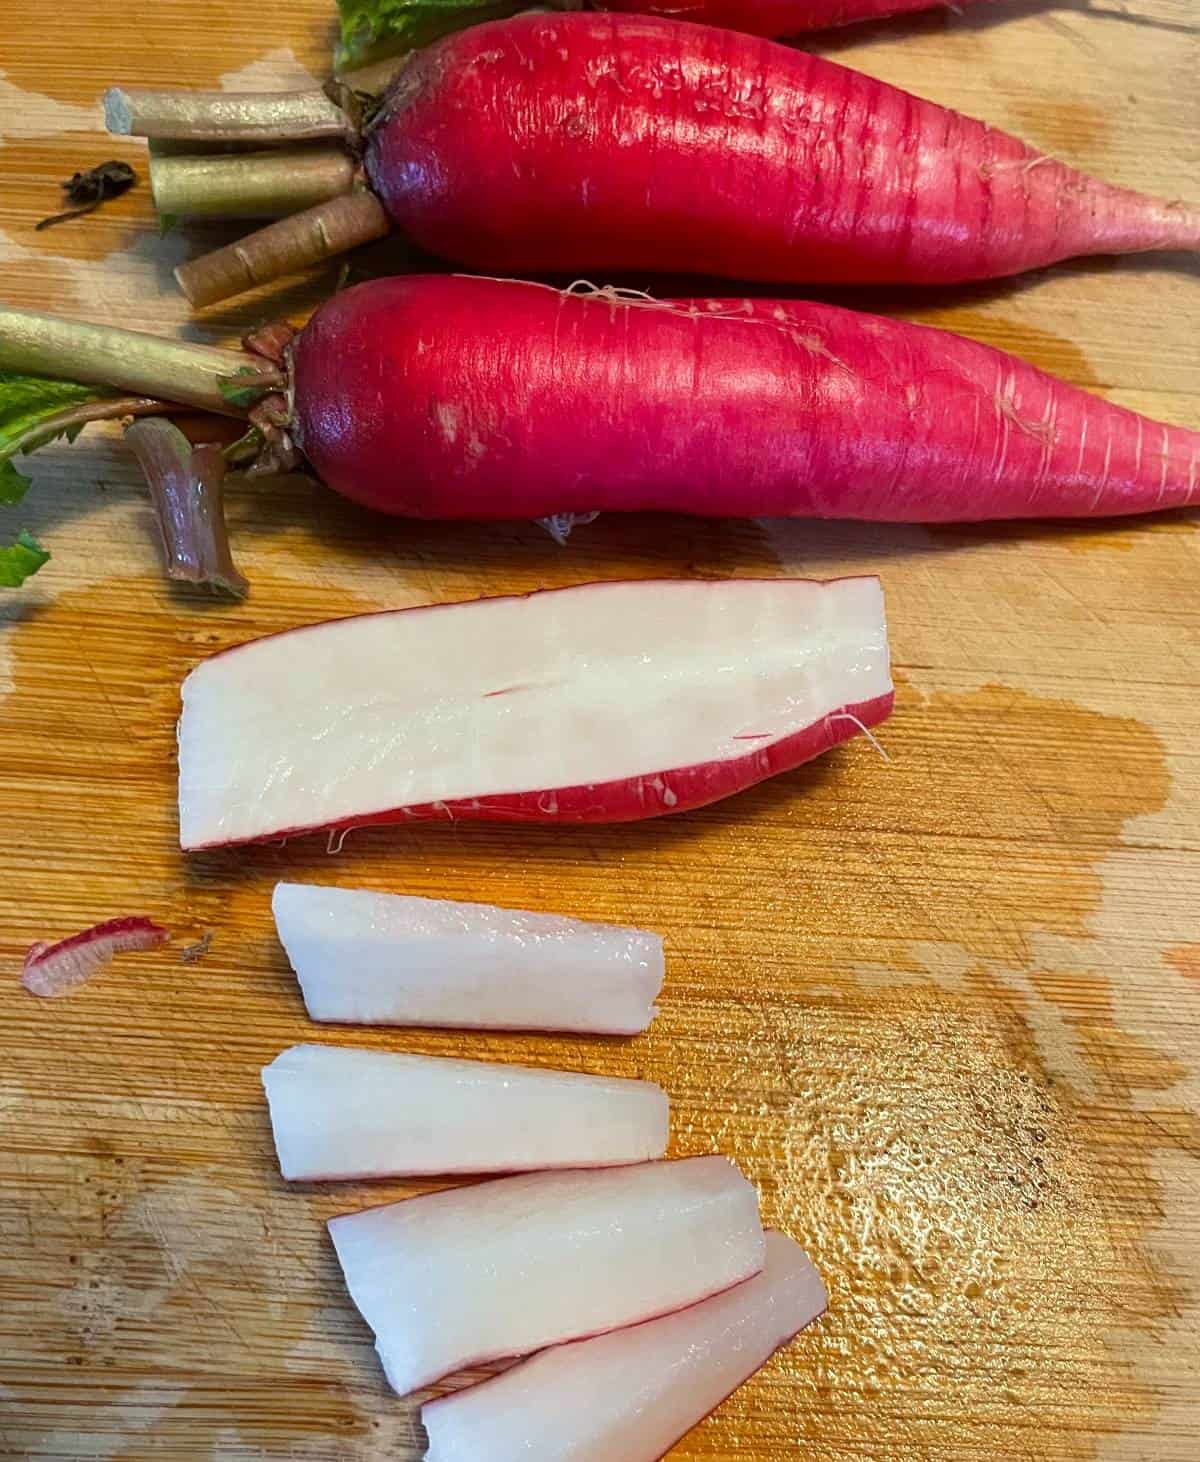 Radishes being chopped on a cutting board, showing the white inside part of the vegetable.